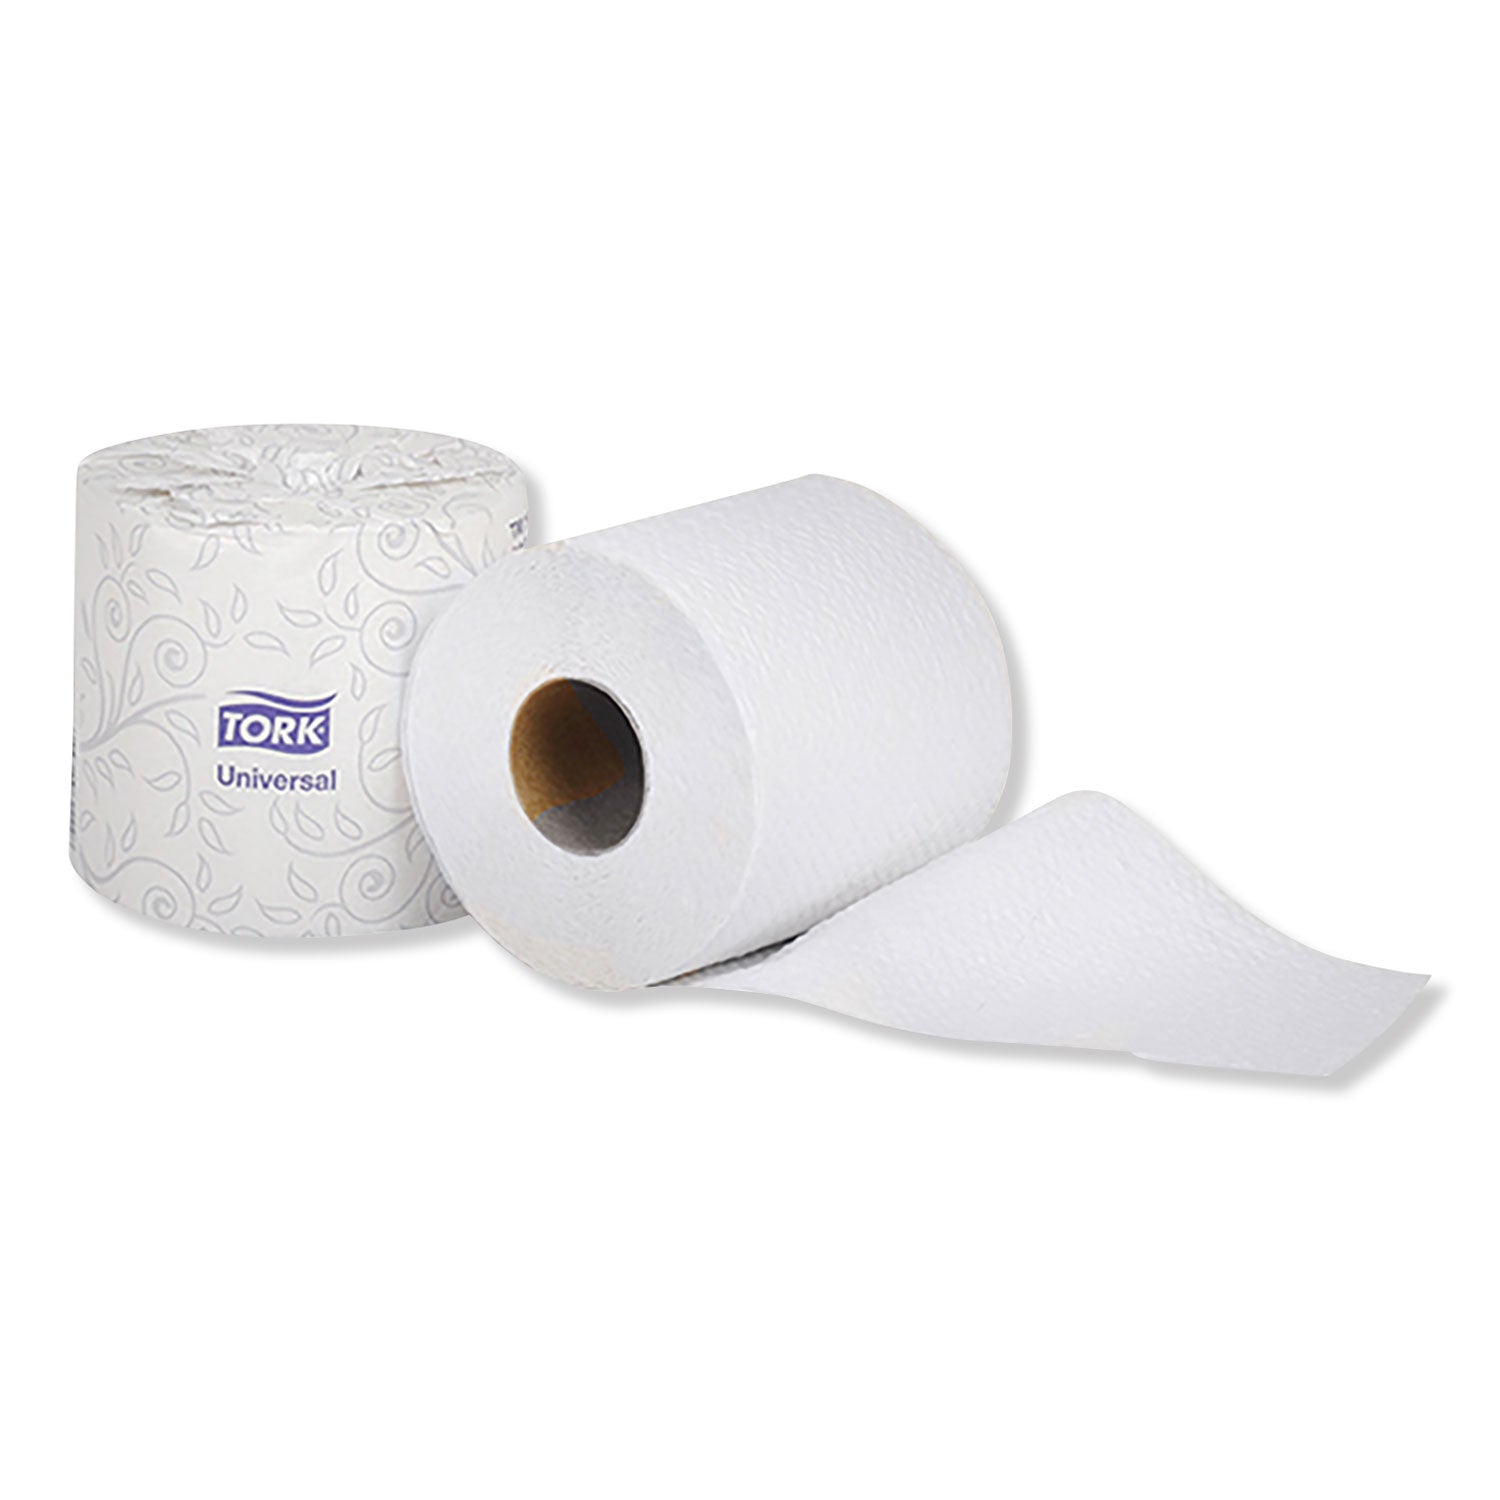 bath-tissue-septic-safe-2-ply-white-616-sheets-roll-48-rolls-carton_trk240616 - 2